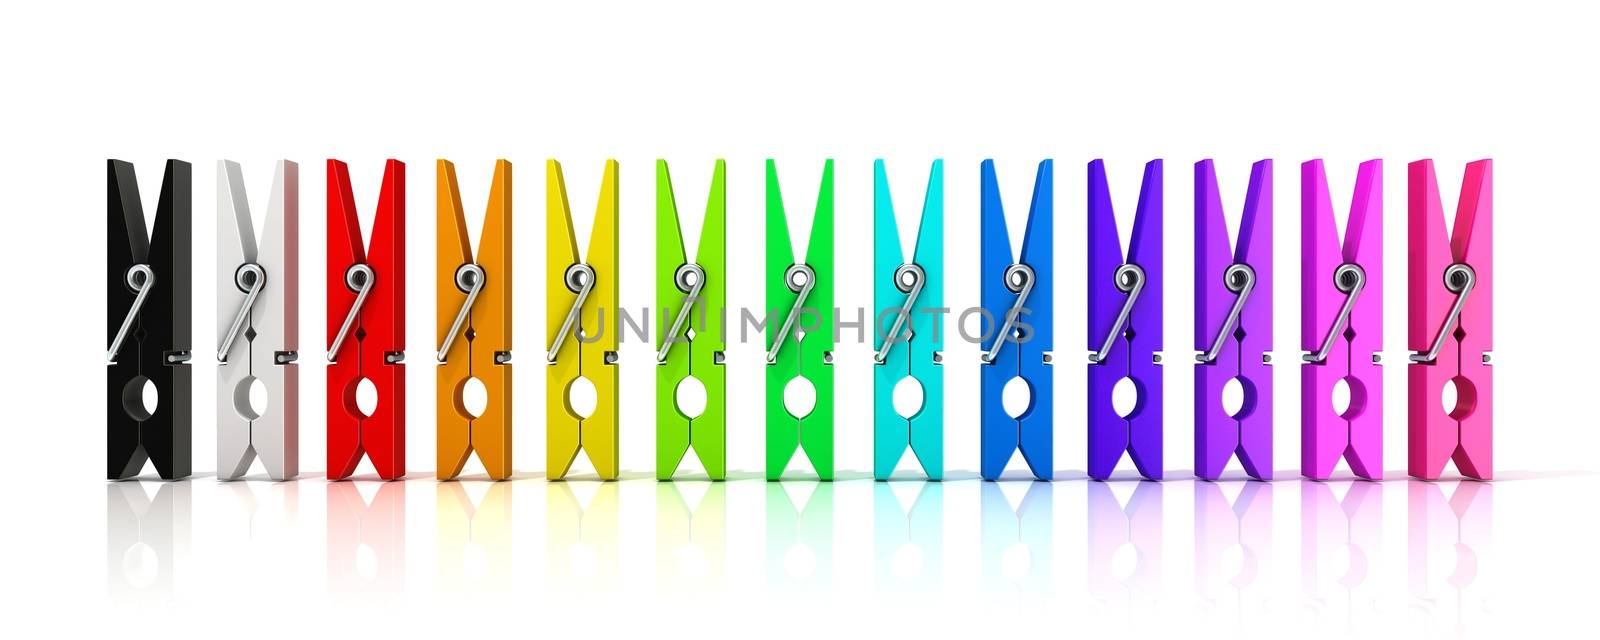 Set of colorful clothes pins. Front view isolated on white background